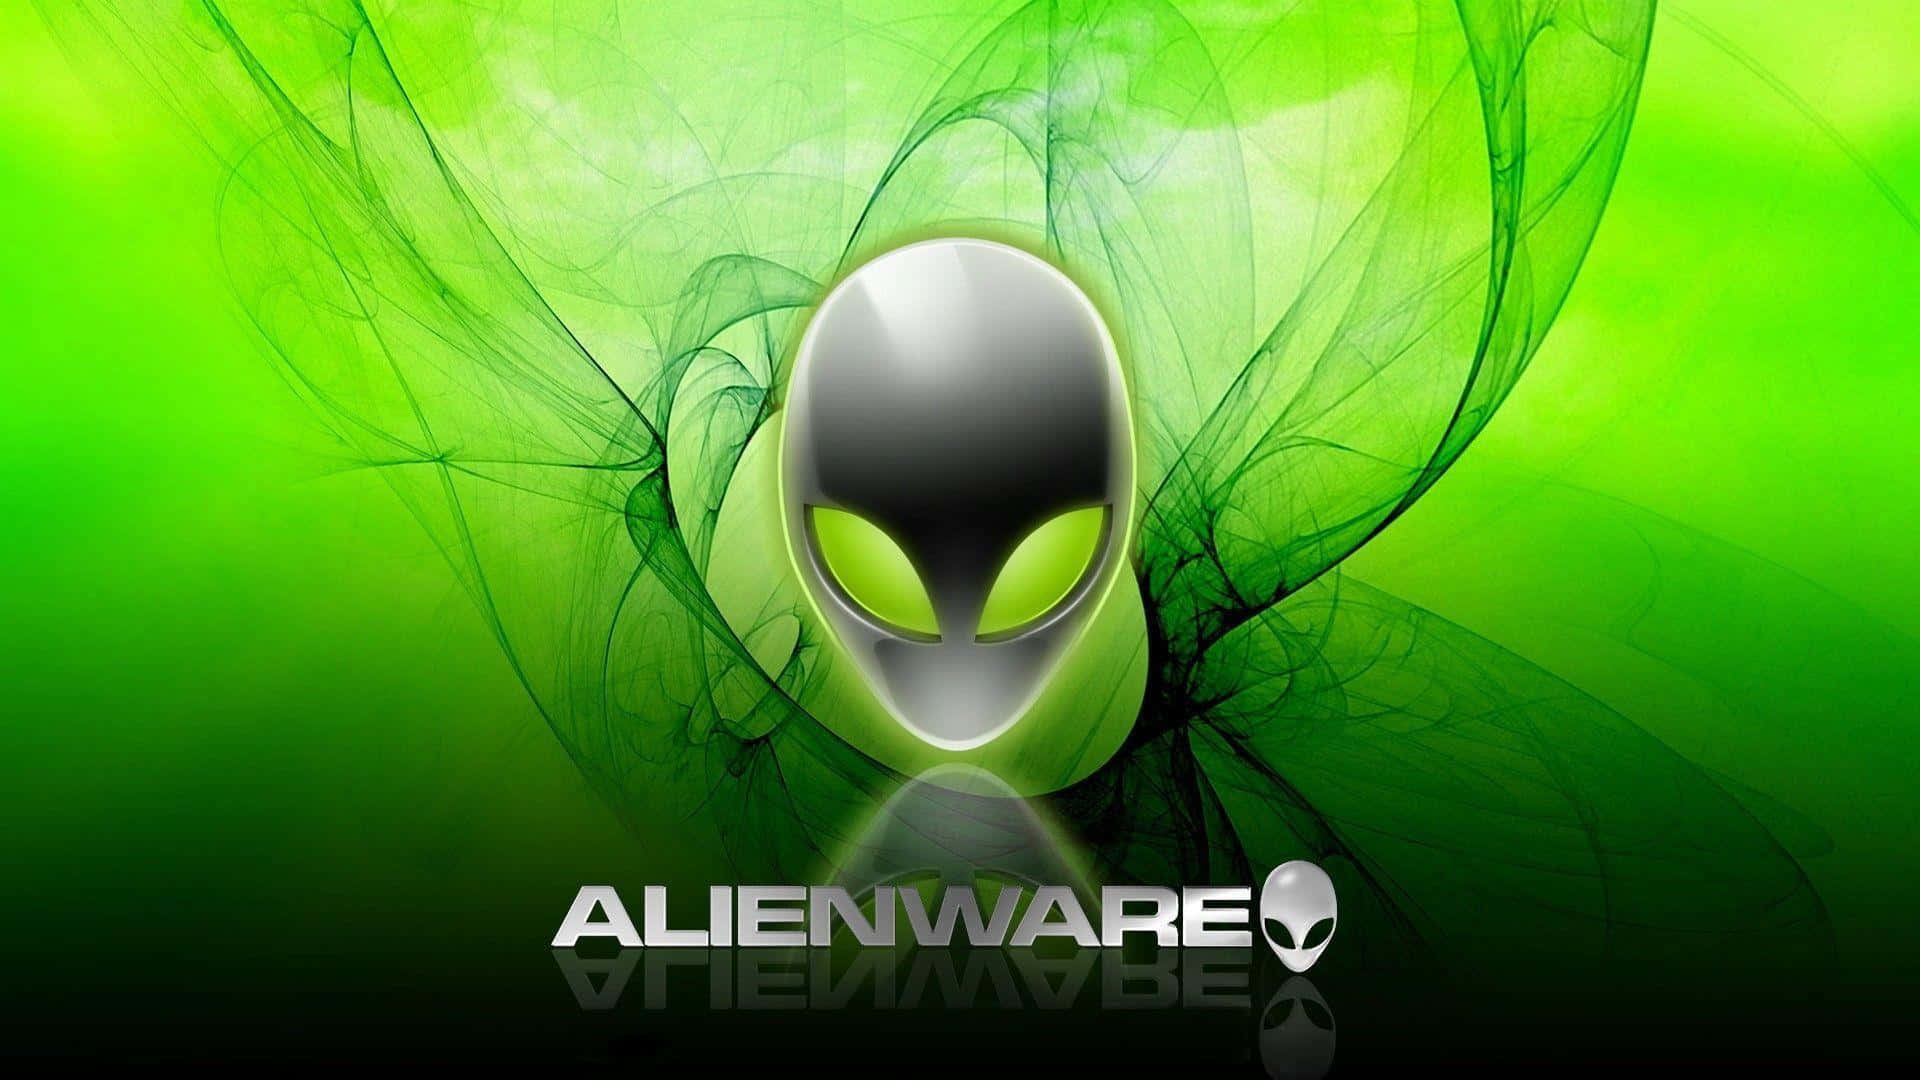 alienware logo on a green background